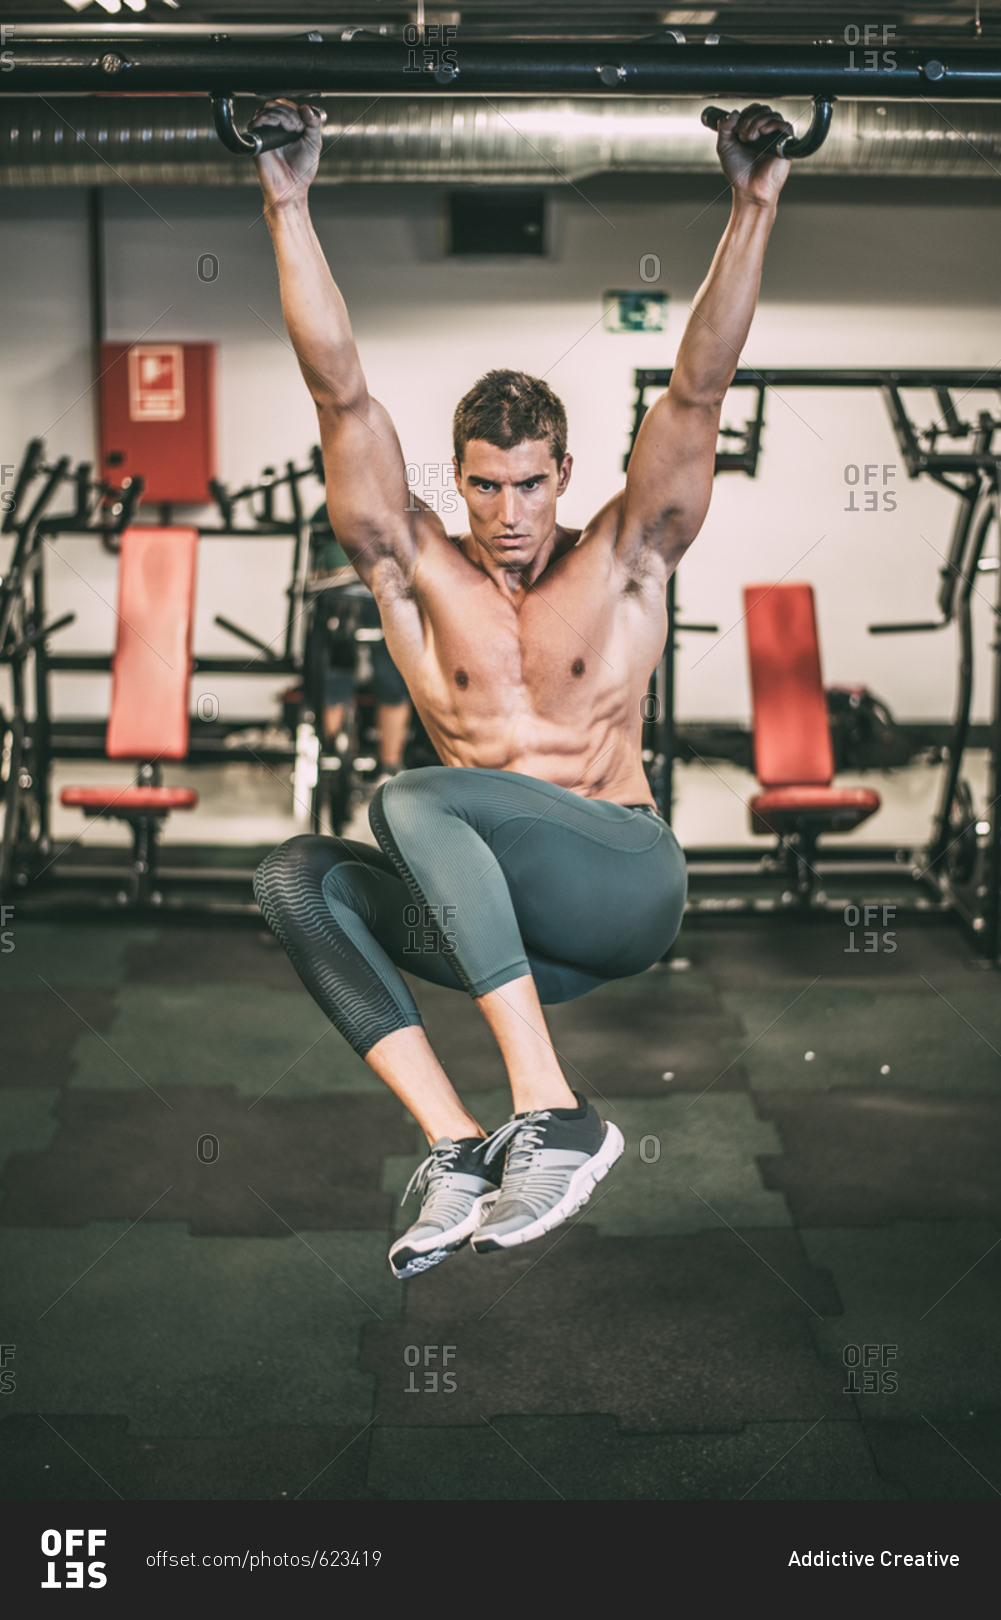 Athletic muscular man hanging and doing chin-ups exercise in gym